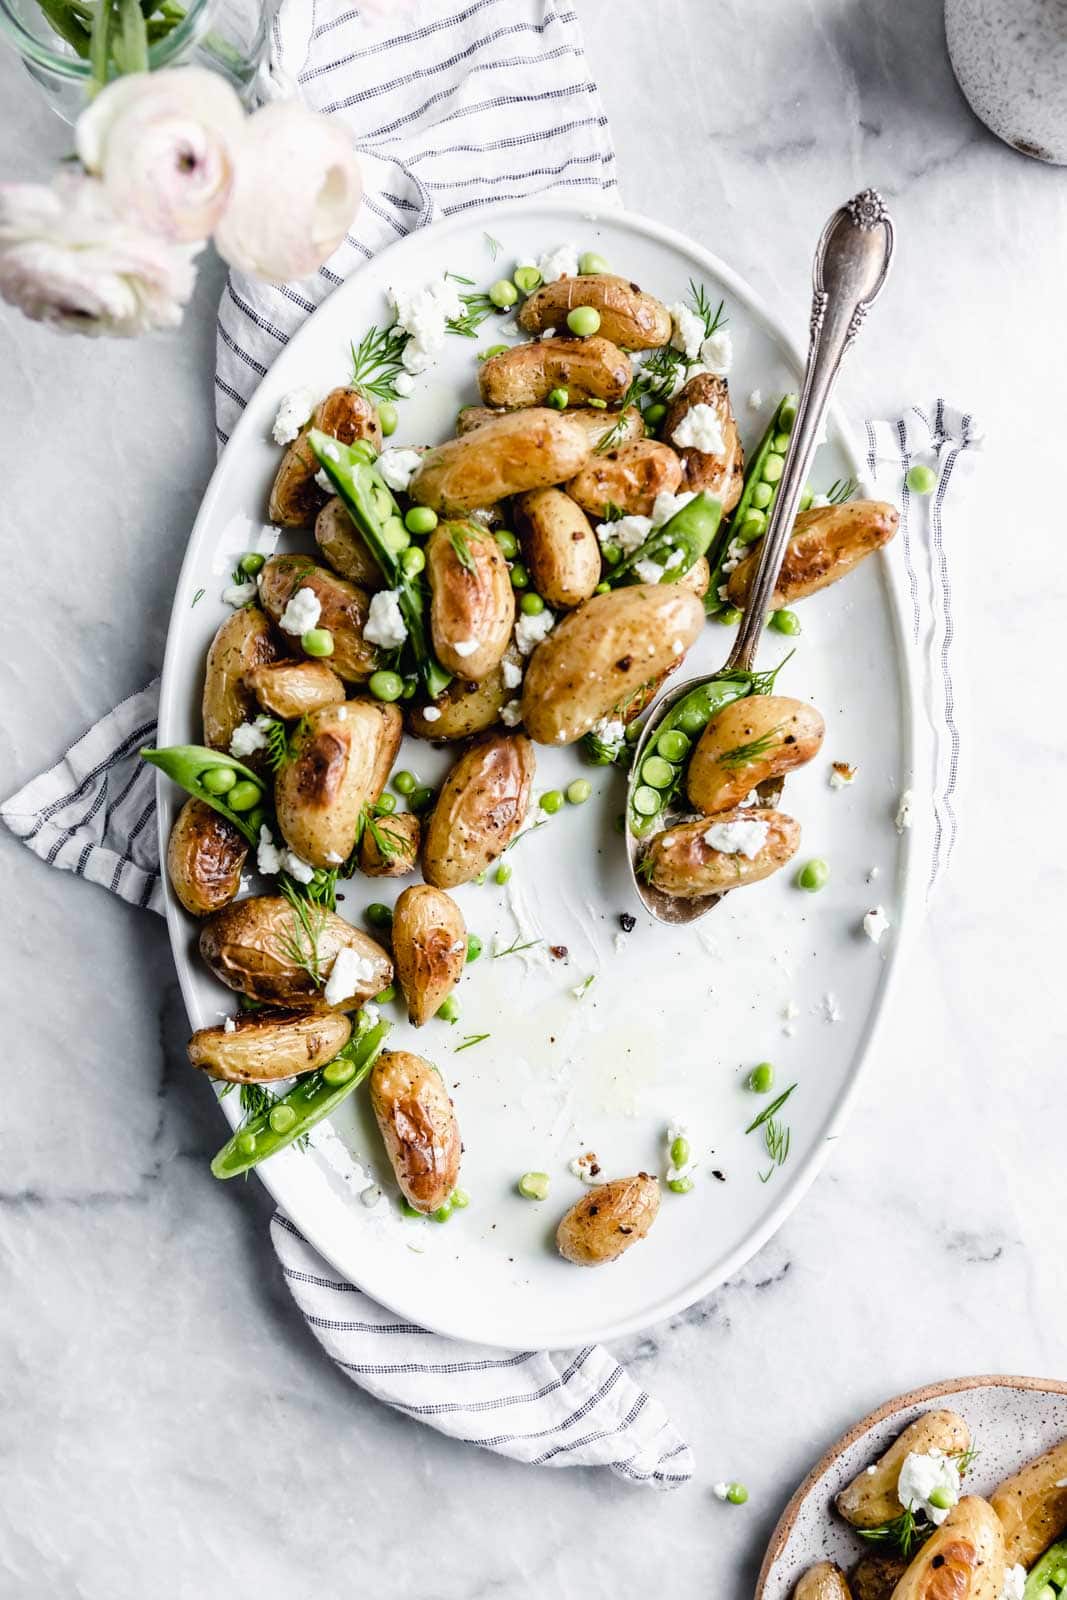 These roasted fingerling potatoes with dill, goat cheese, and peas are our new fav side dish. Full of texture and flavor, you'll love these spring potatoes.